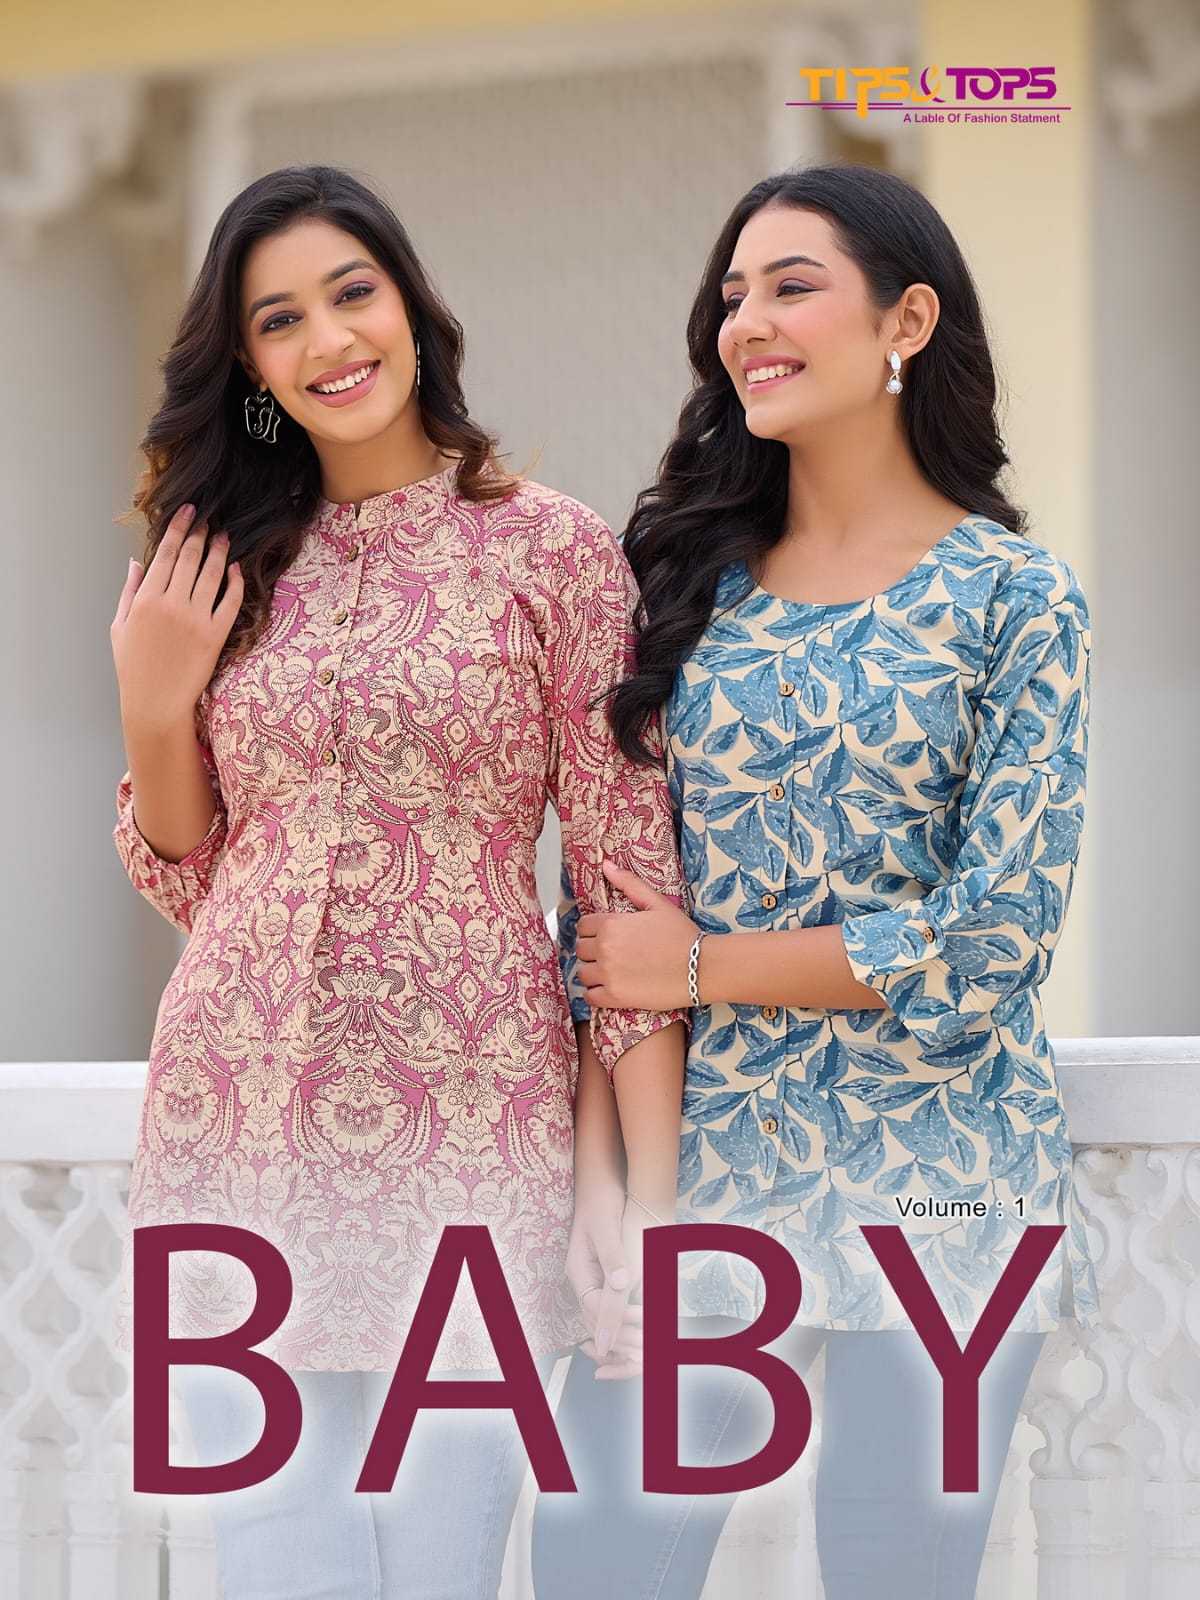 tips and tops baby vol 1 readymade fancy short tops catalog